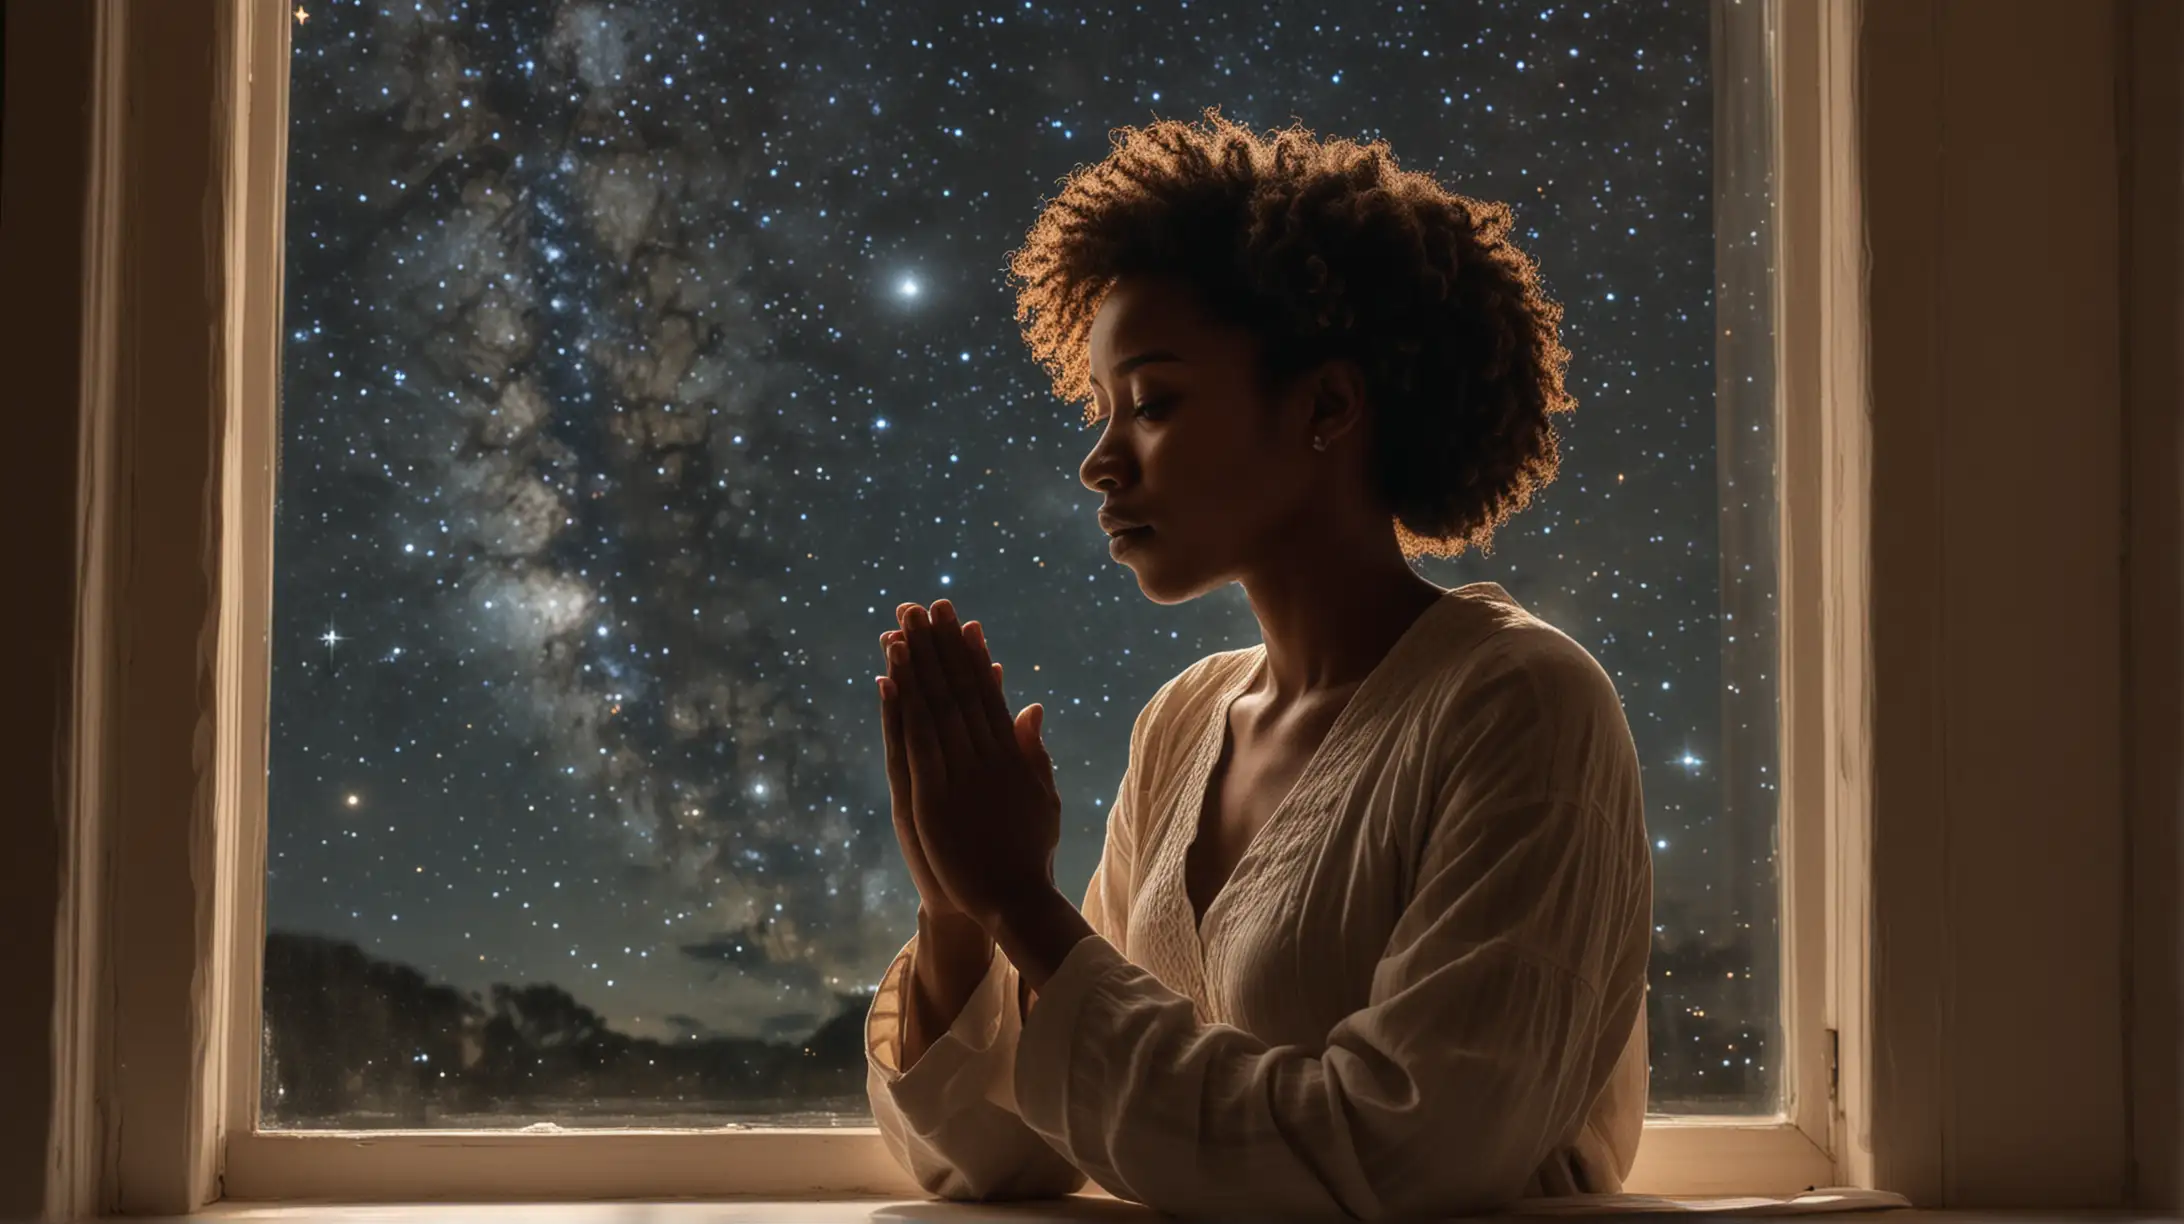 An African American women kneeling in prayer by a window: Capture the moment described in the story where the protagonist bows their head in prayer, looking out at the stars through a window. The image should convey a sense of serenity and contemplation.